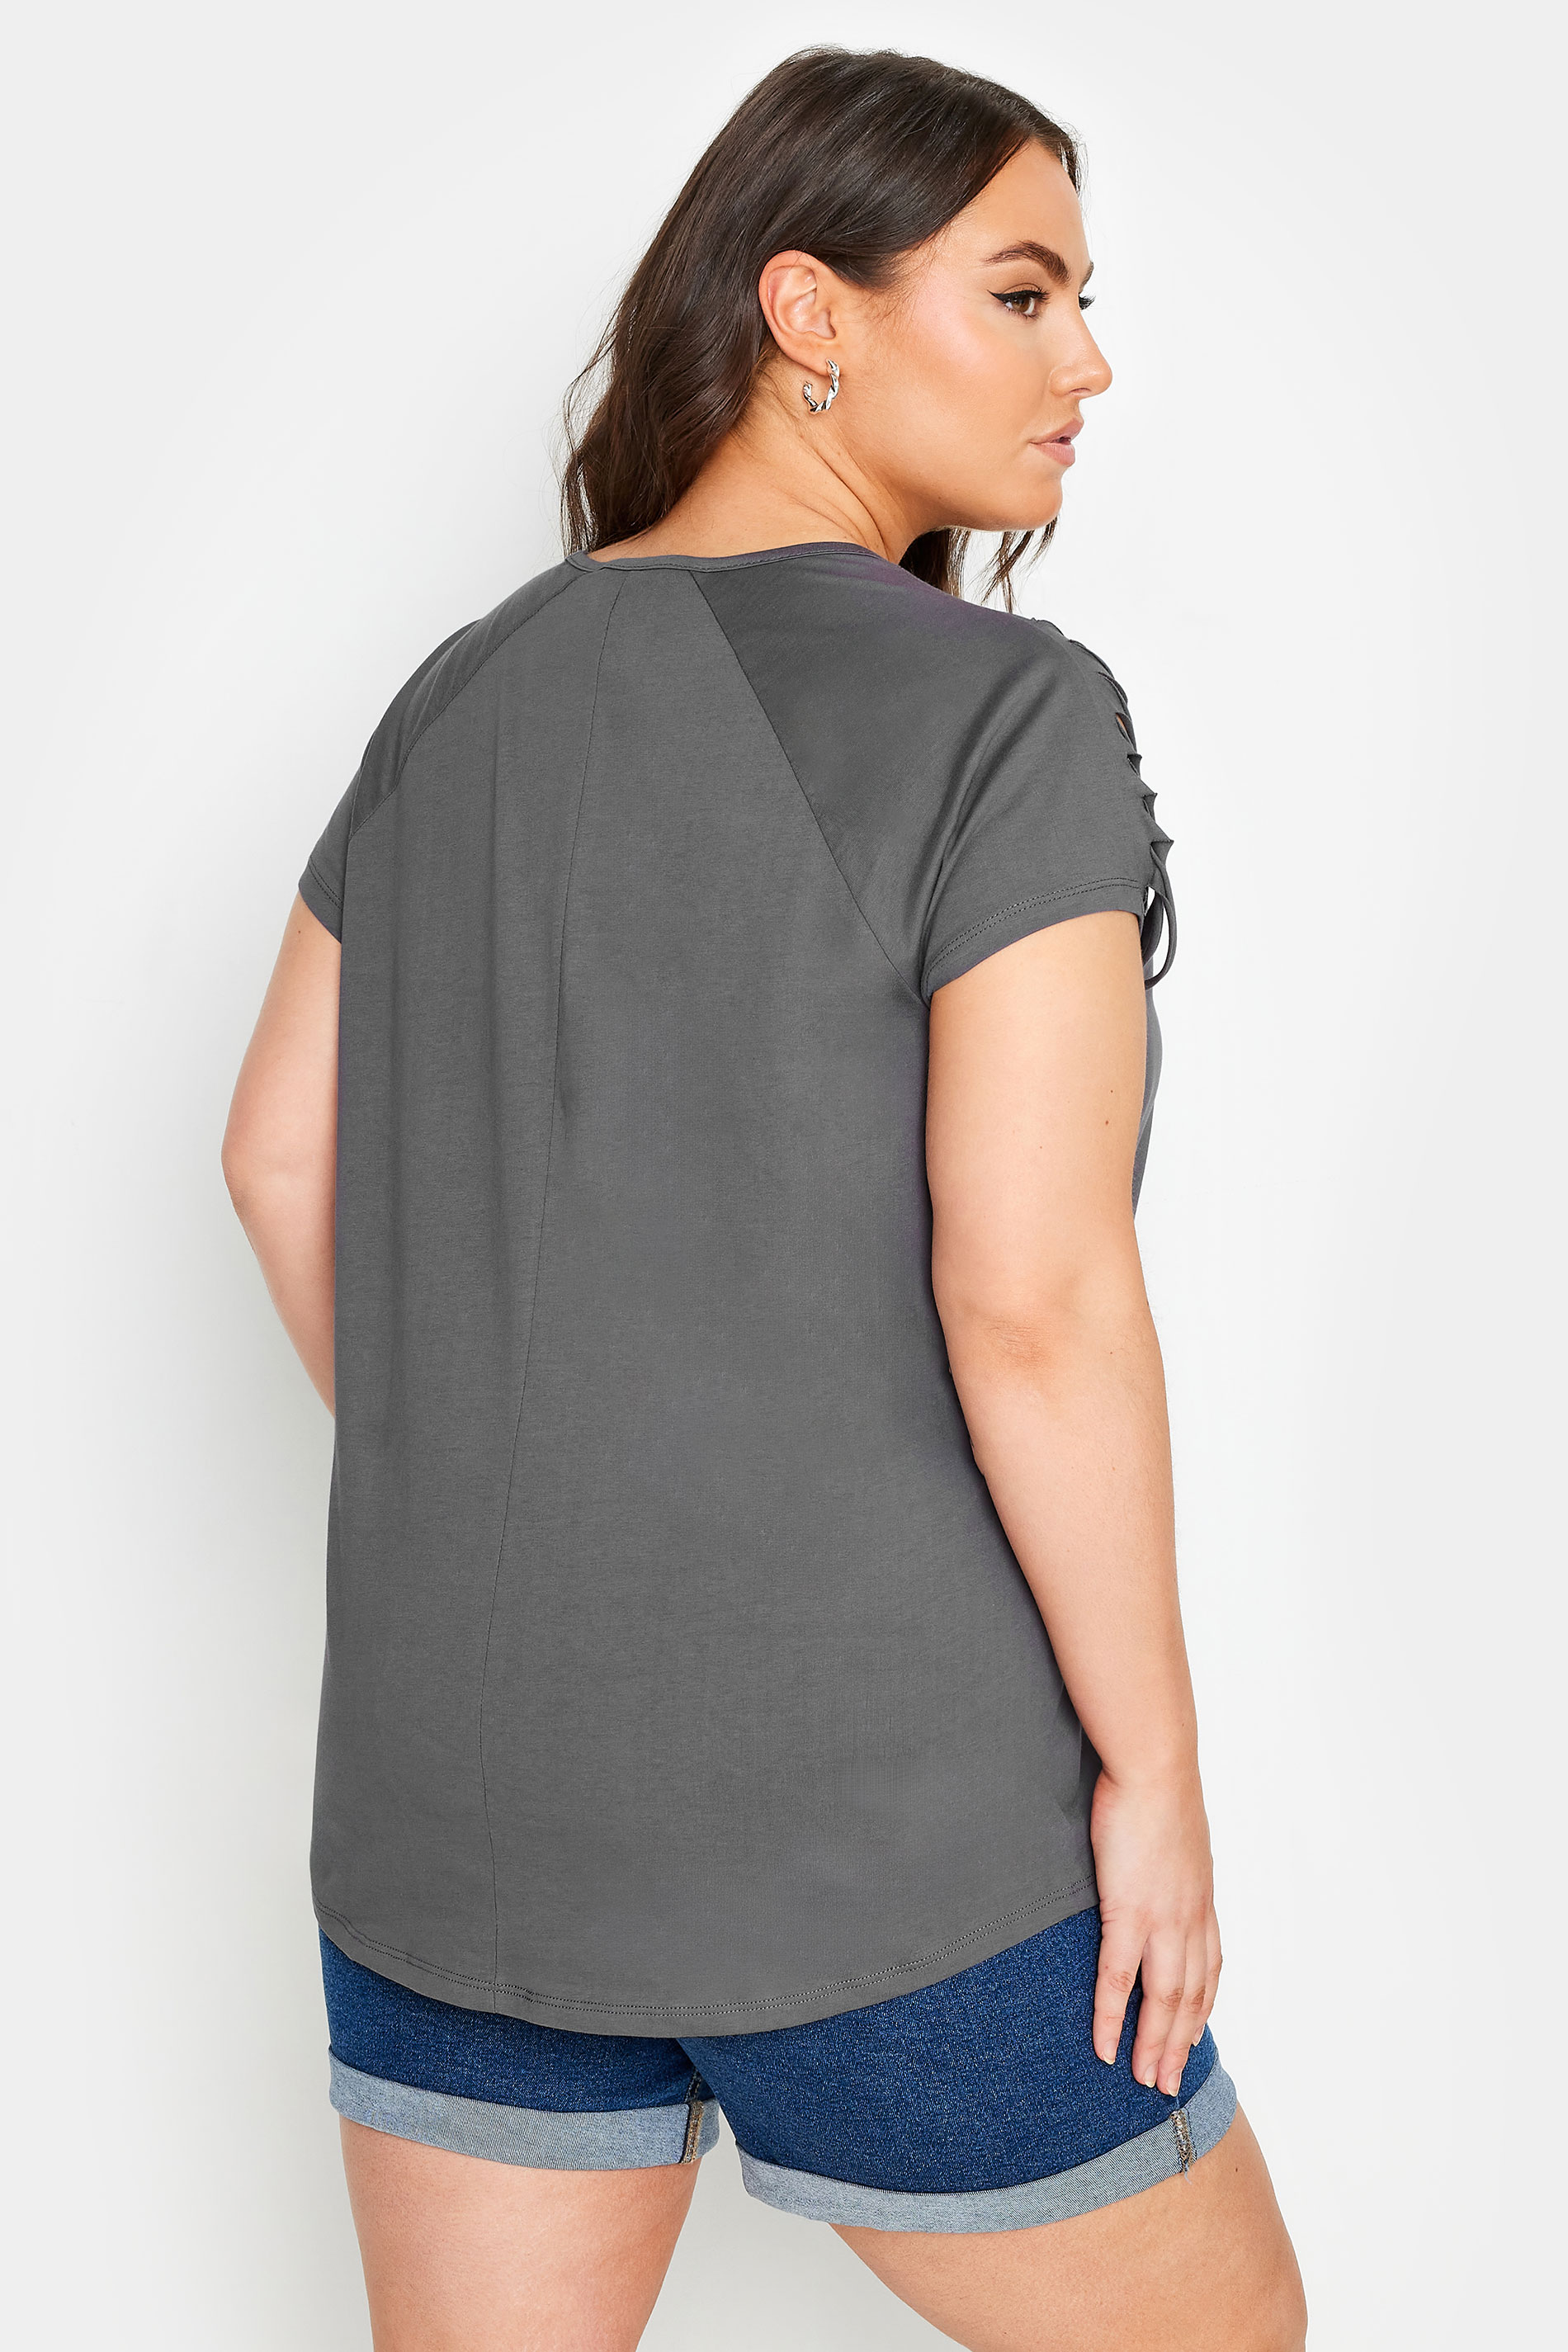 YOURS Plus Size Grey Cut Out 'California' Slogan T-Shirt | Yours Clothing 3